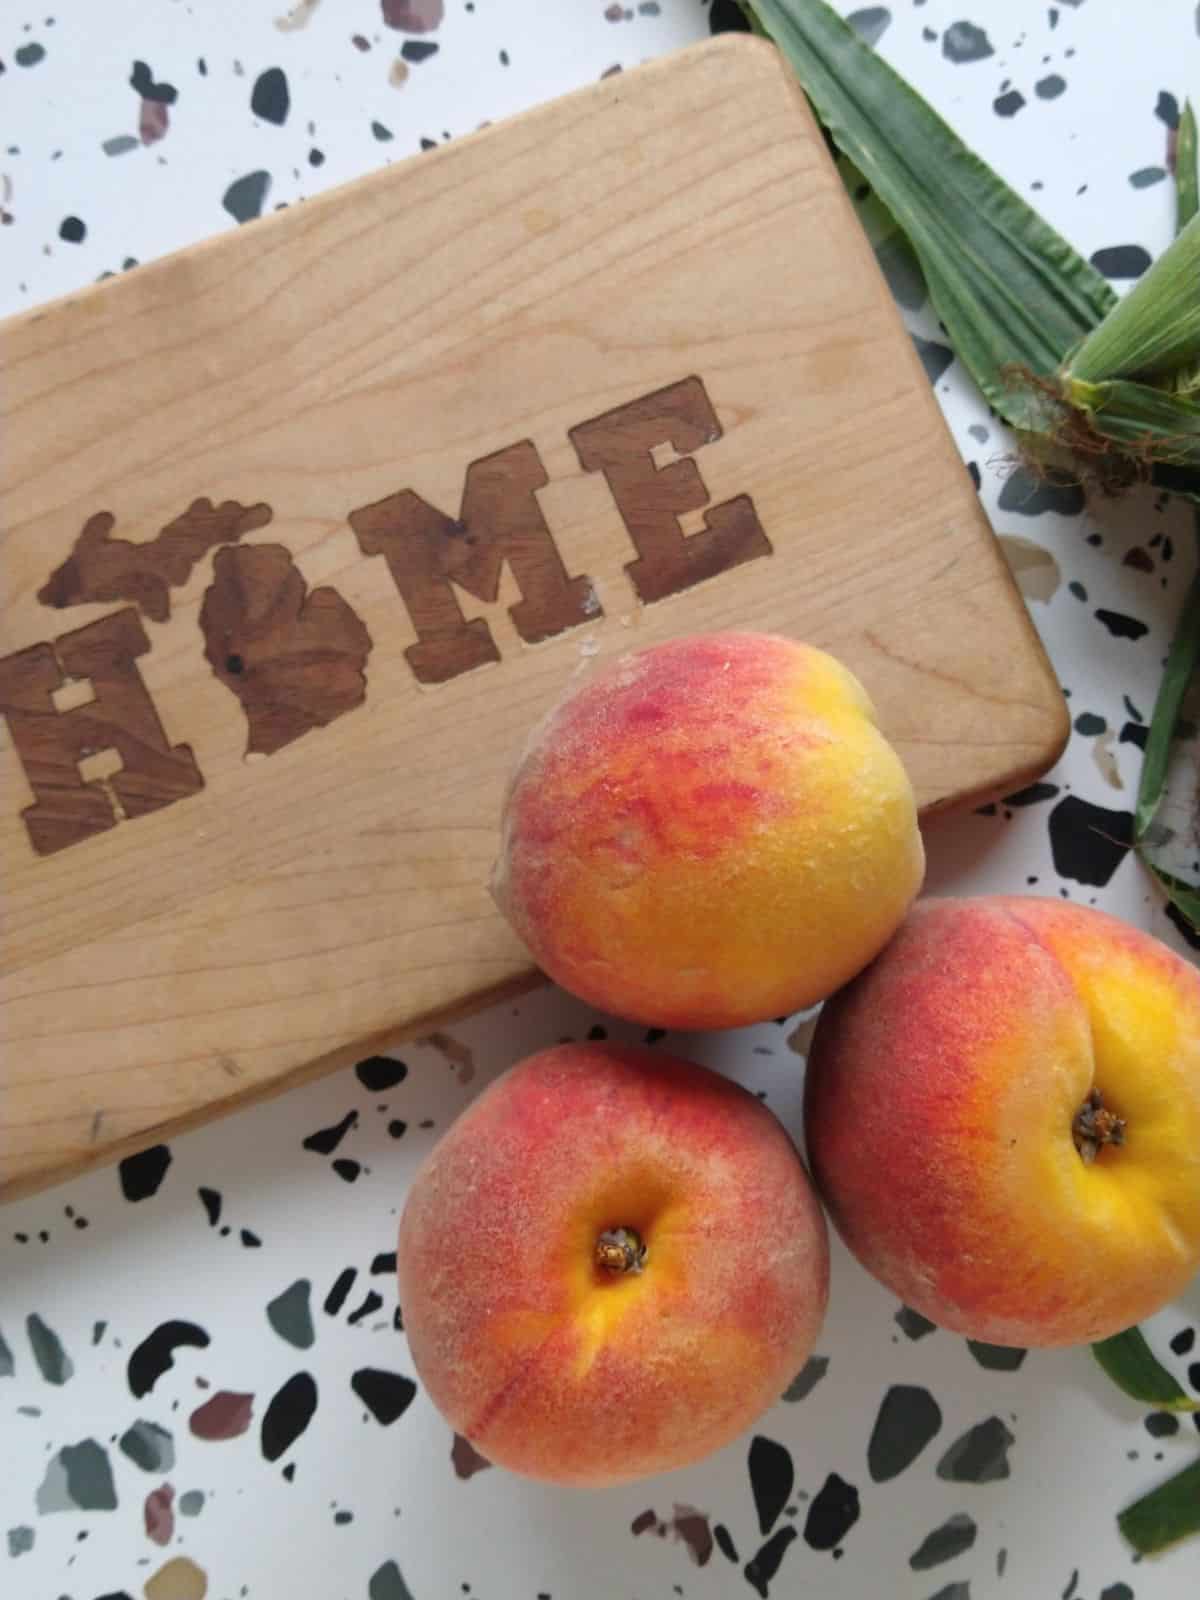 Yellow flesh peaches sitting next to a wood cutting board that says home with a picture of Michigan replacing the "O". 